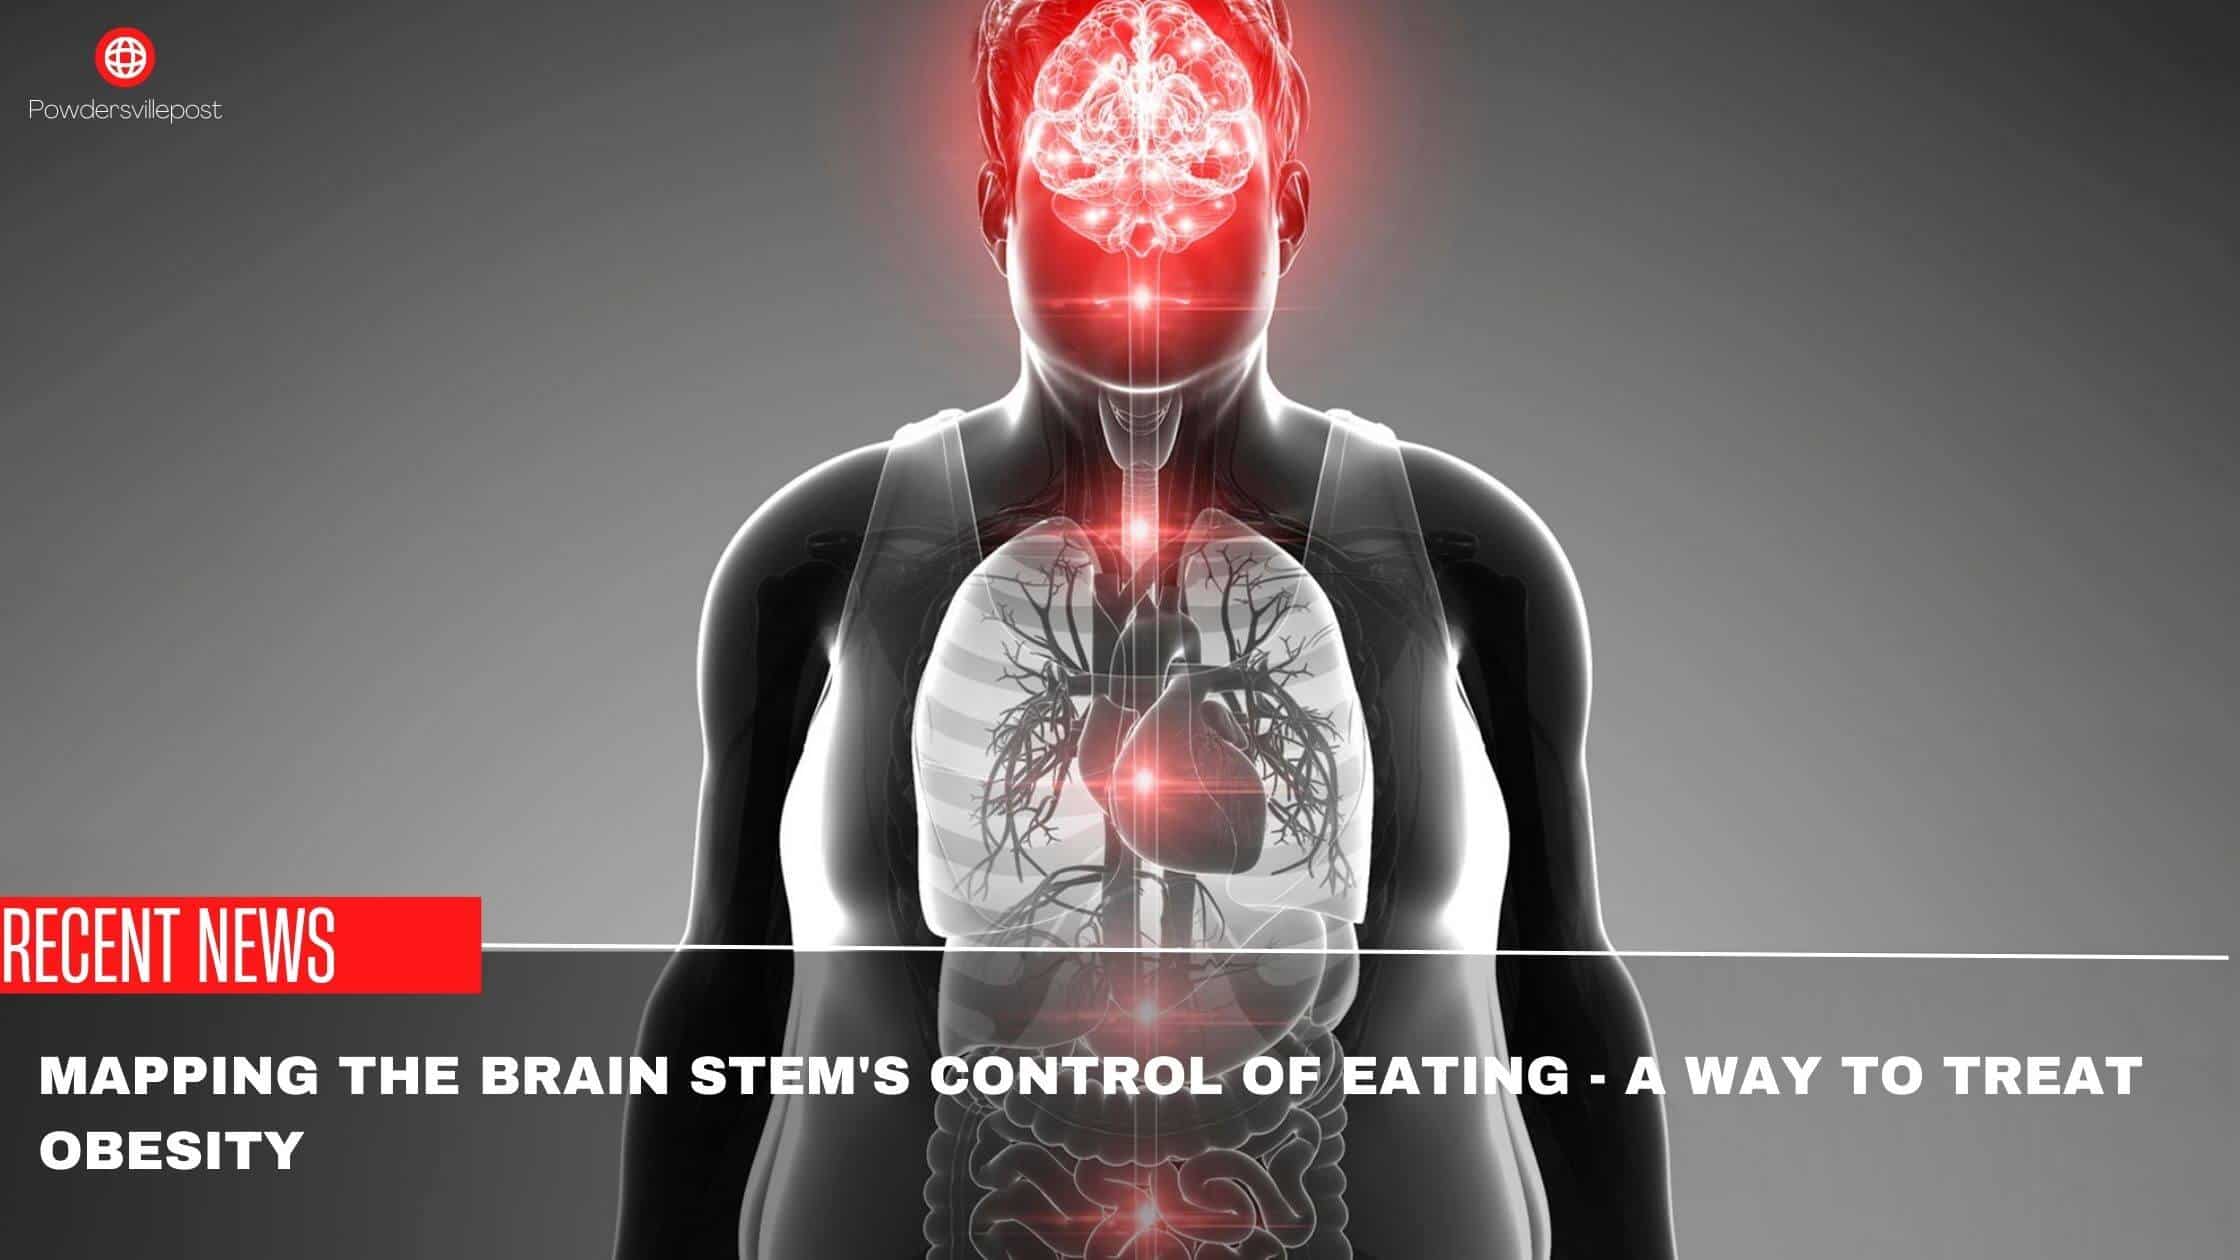 Mapping The Brain Stem's Control Of Eating - A Way To Treat Obesity